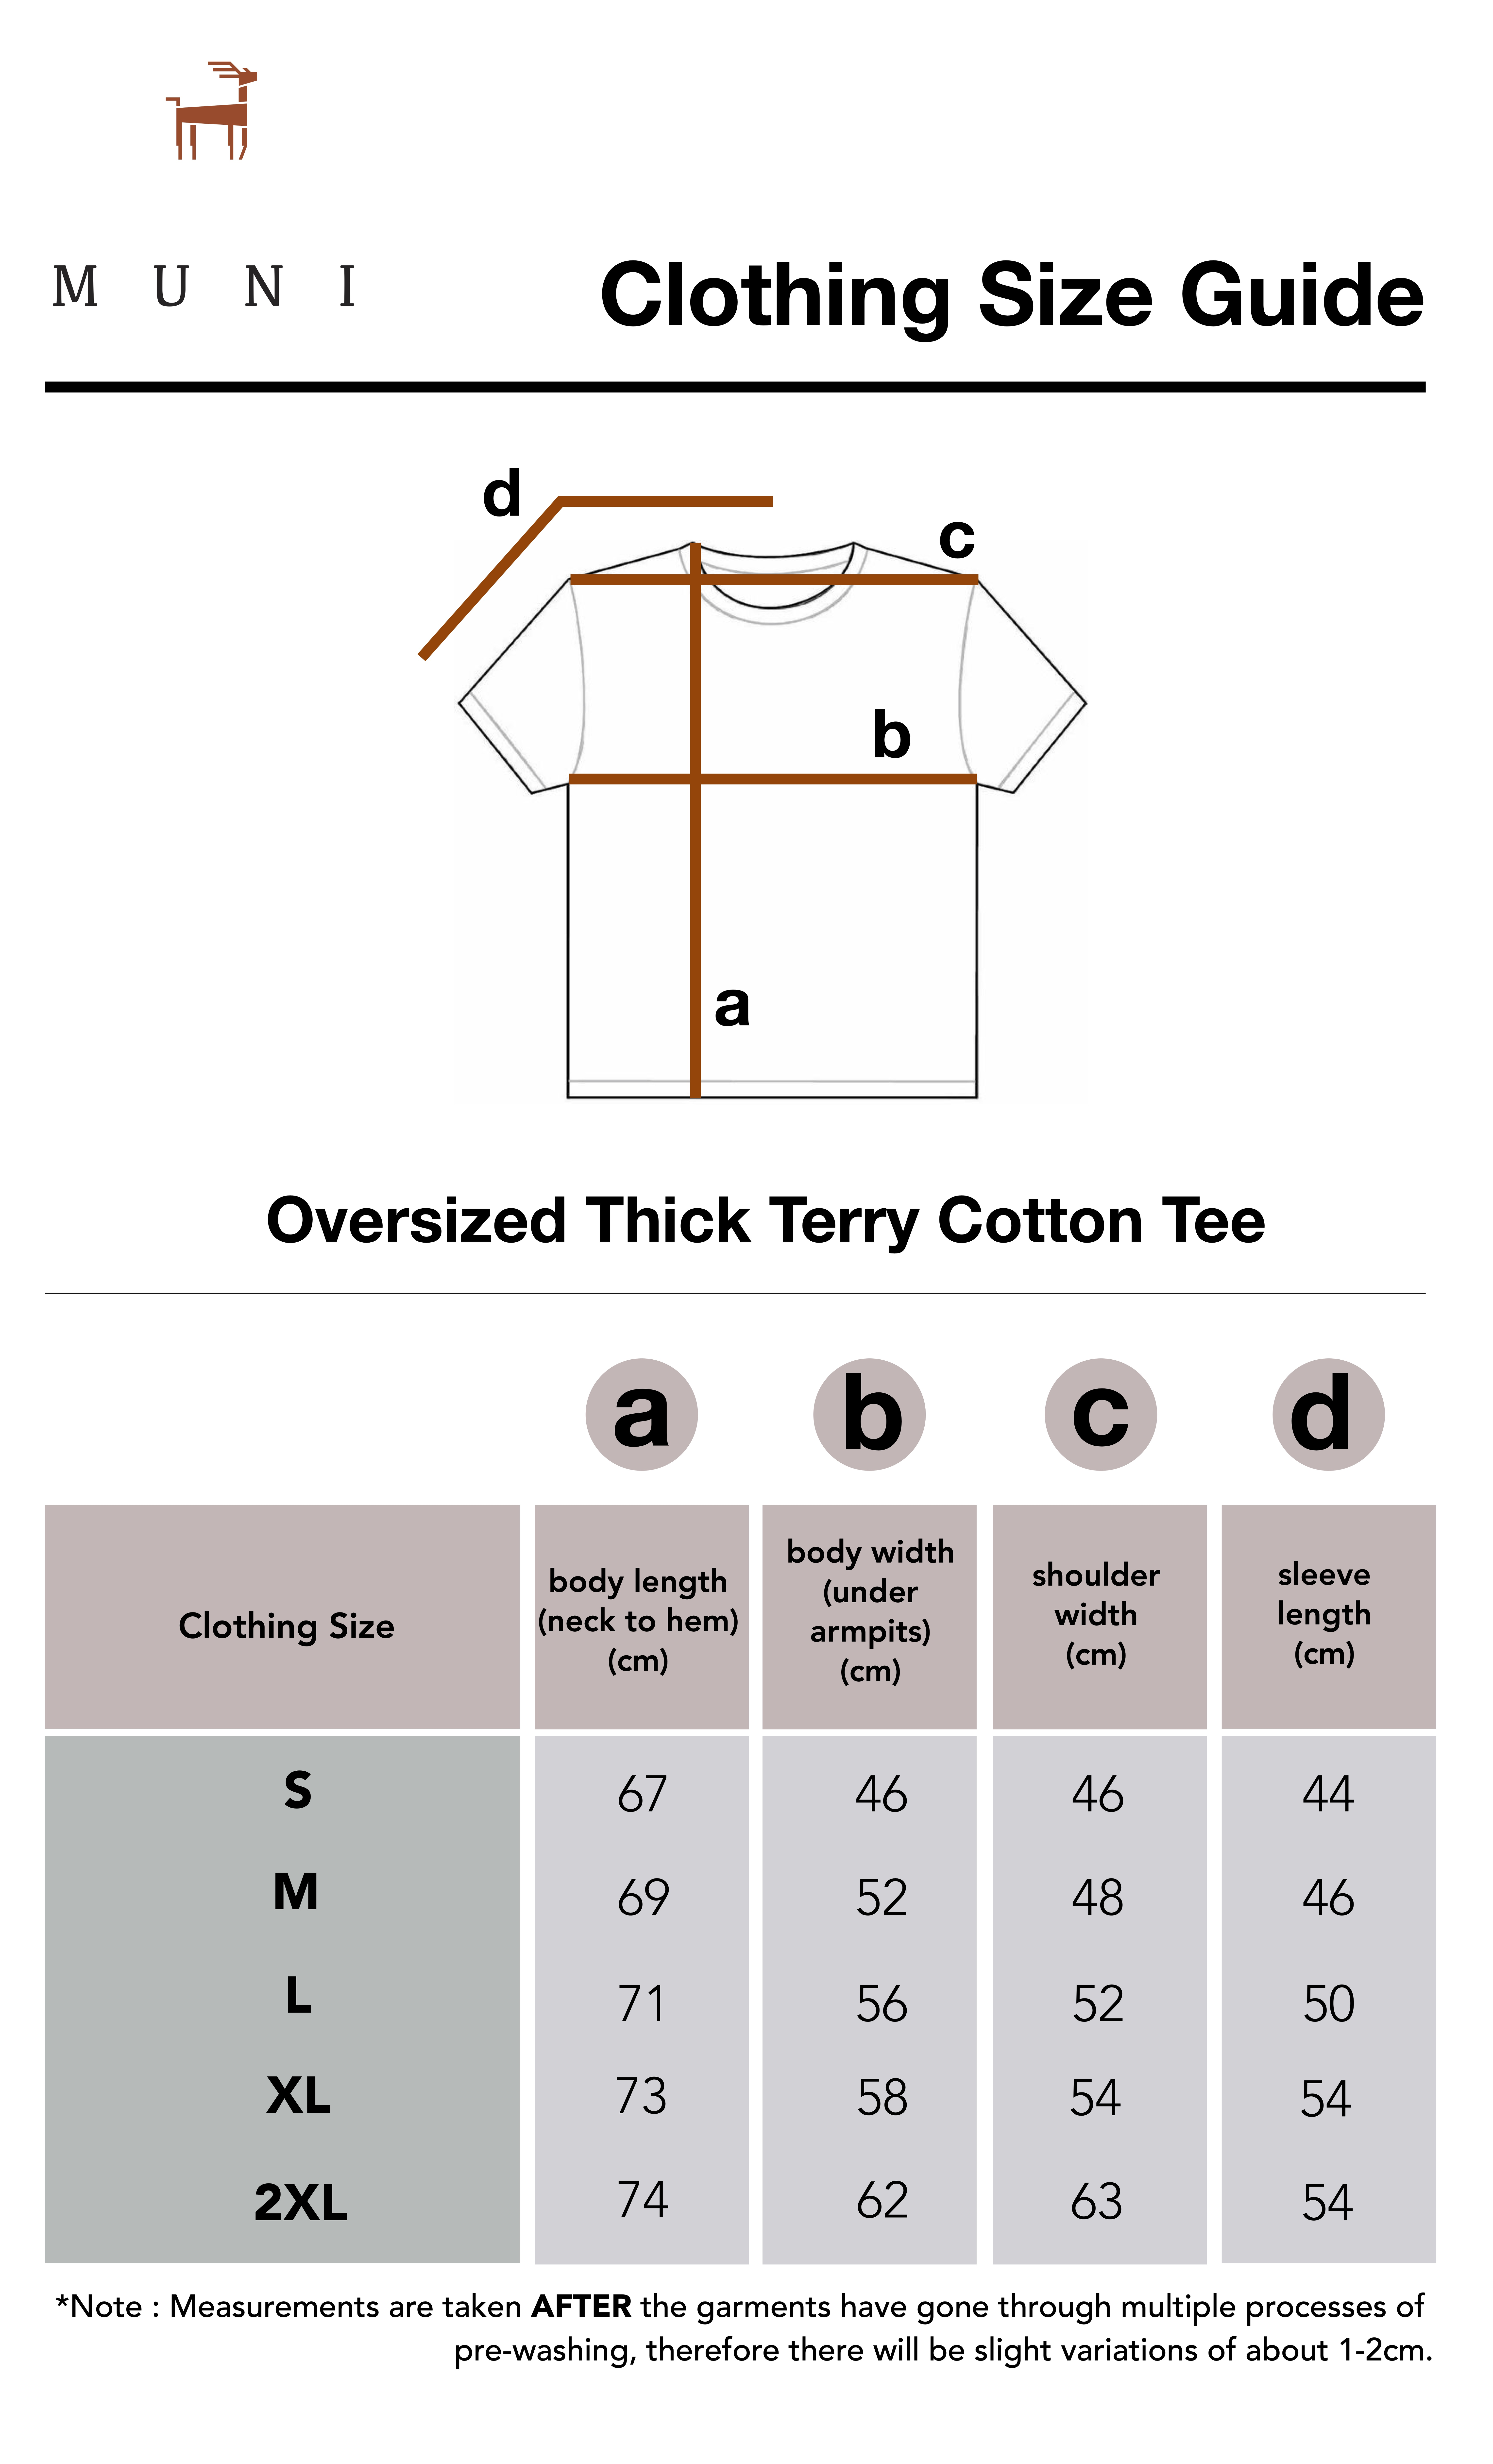 Oversized thick terry tee size chart copy.jpg